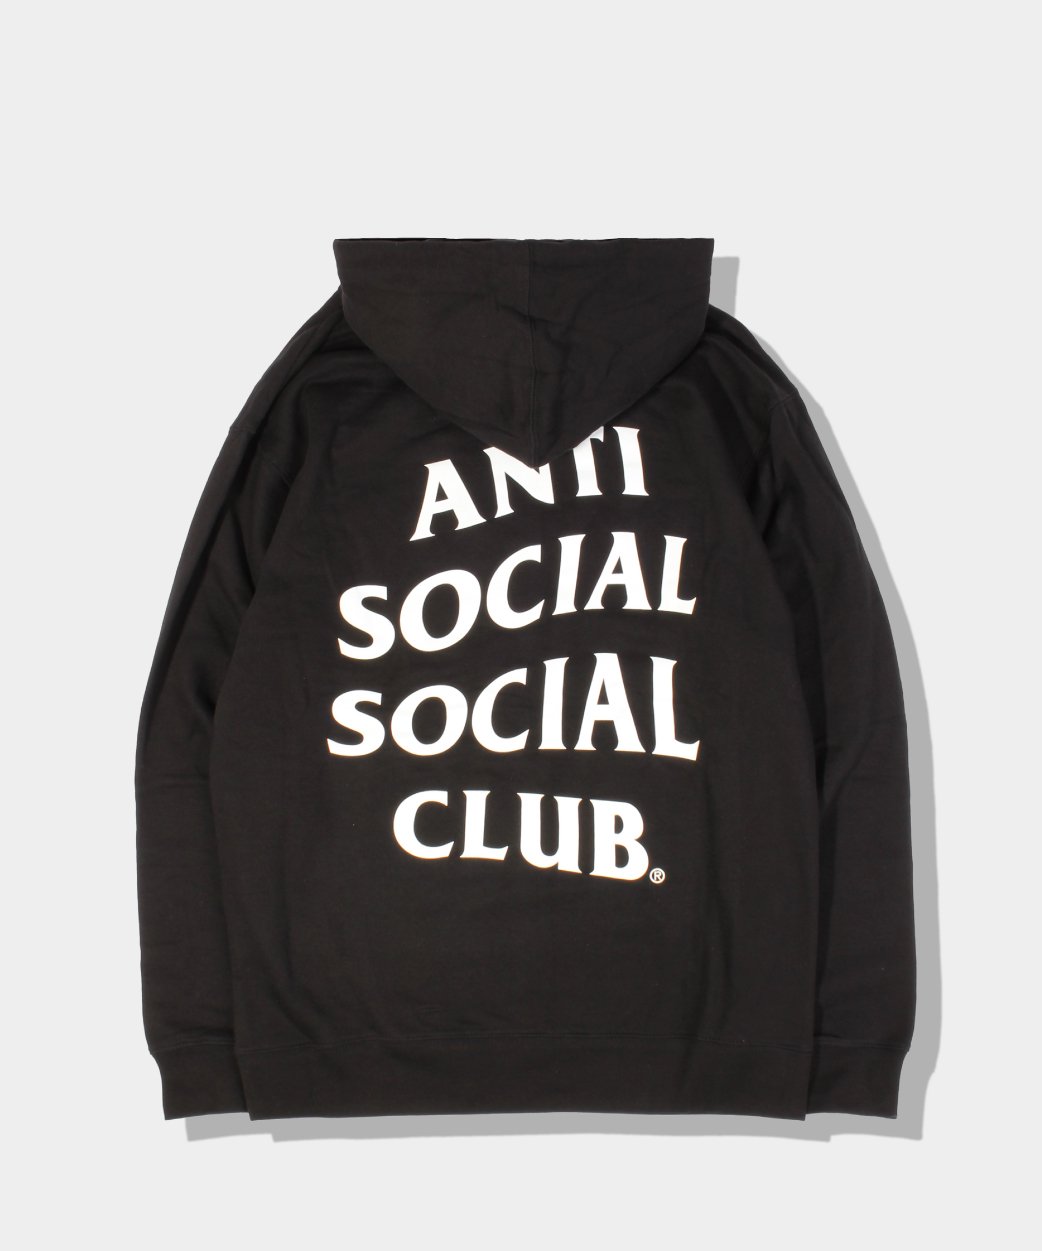 SALE 40% OFF! <br>Anti Social Social Club ASSCアンチソーシャルソーシャルクラブ<br> Mind Games Hoodie/パーカー<img class='new_mark_img2' src='https://img.shop-pro.jp/img/new/icons20.gif' style='border:none;display:inline;margin:0px;padding:0px;width:auto;' />